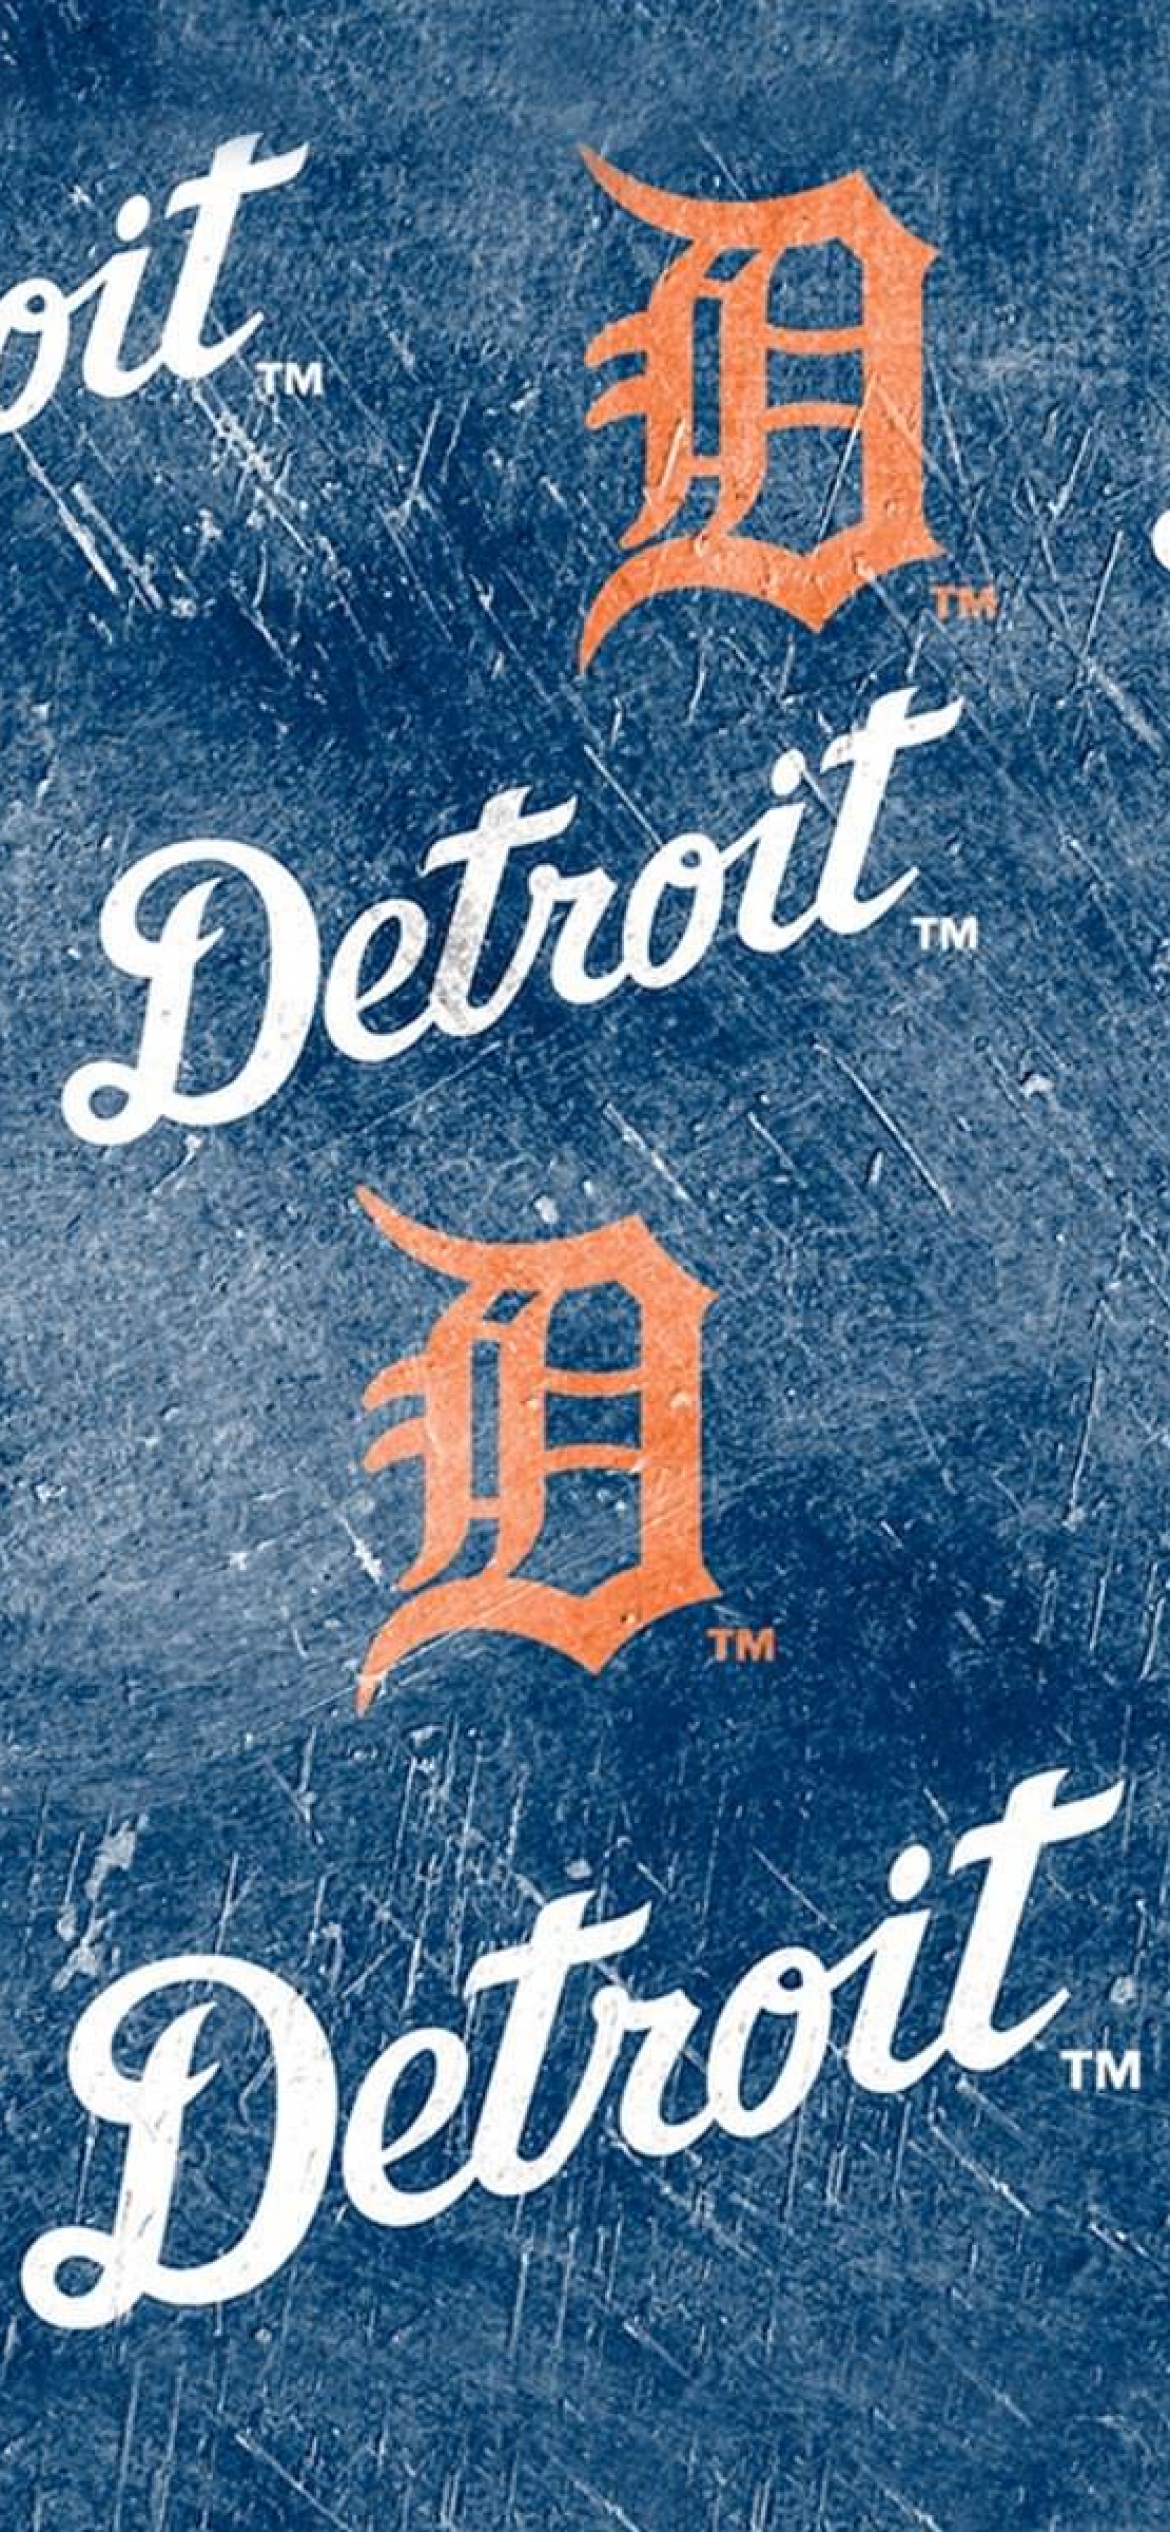 Detroit Tigers on Twitter Made some wallpapers in honor of Mr Tiger  WallpaperWednesday httpstcoVngvR1cog2  Twitter